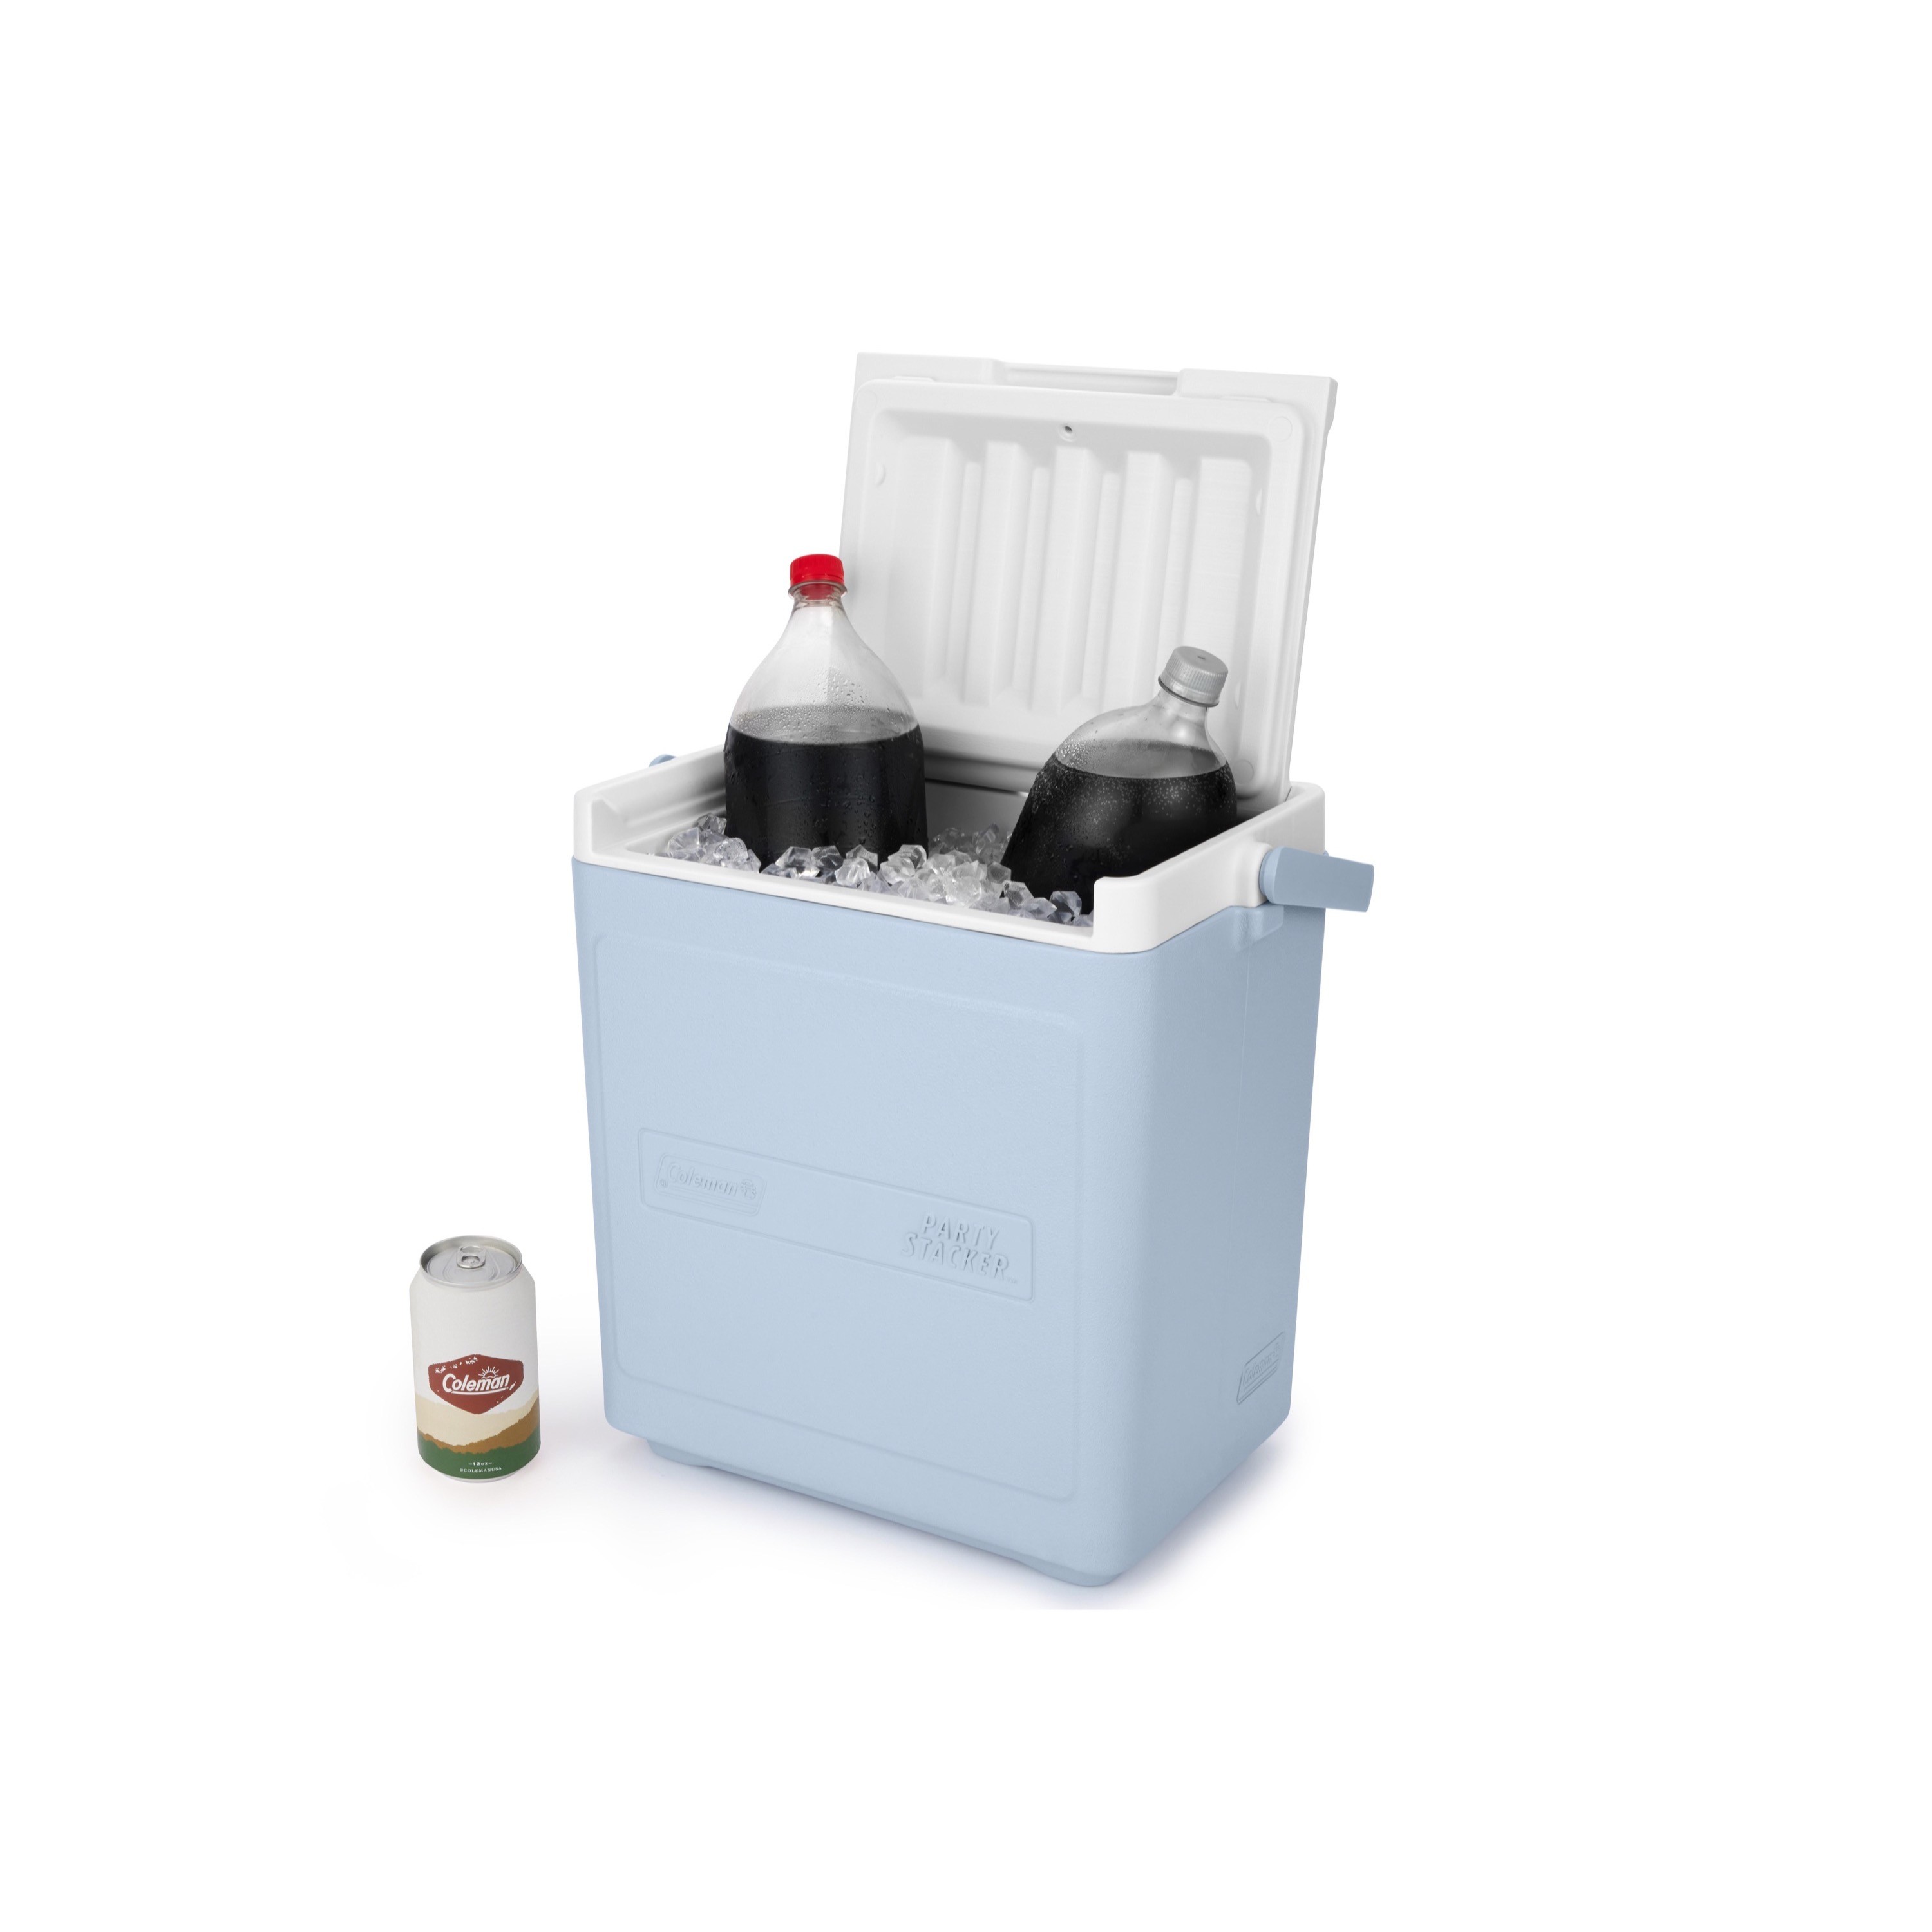 Coleman Chiller 20 Can Party Stacker Portable Hard Cooler, Gray - image 3 of 6